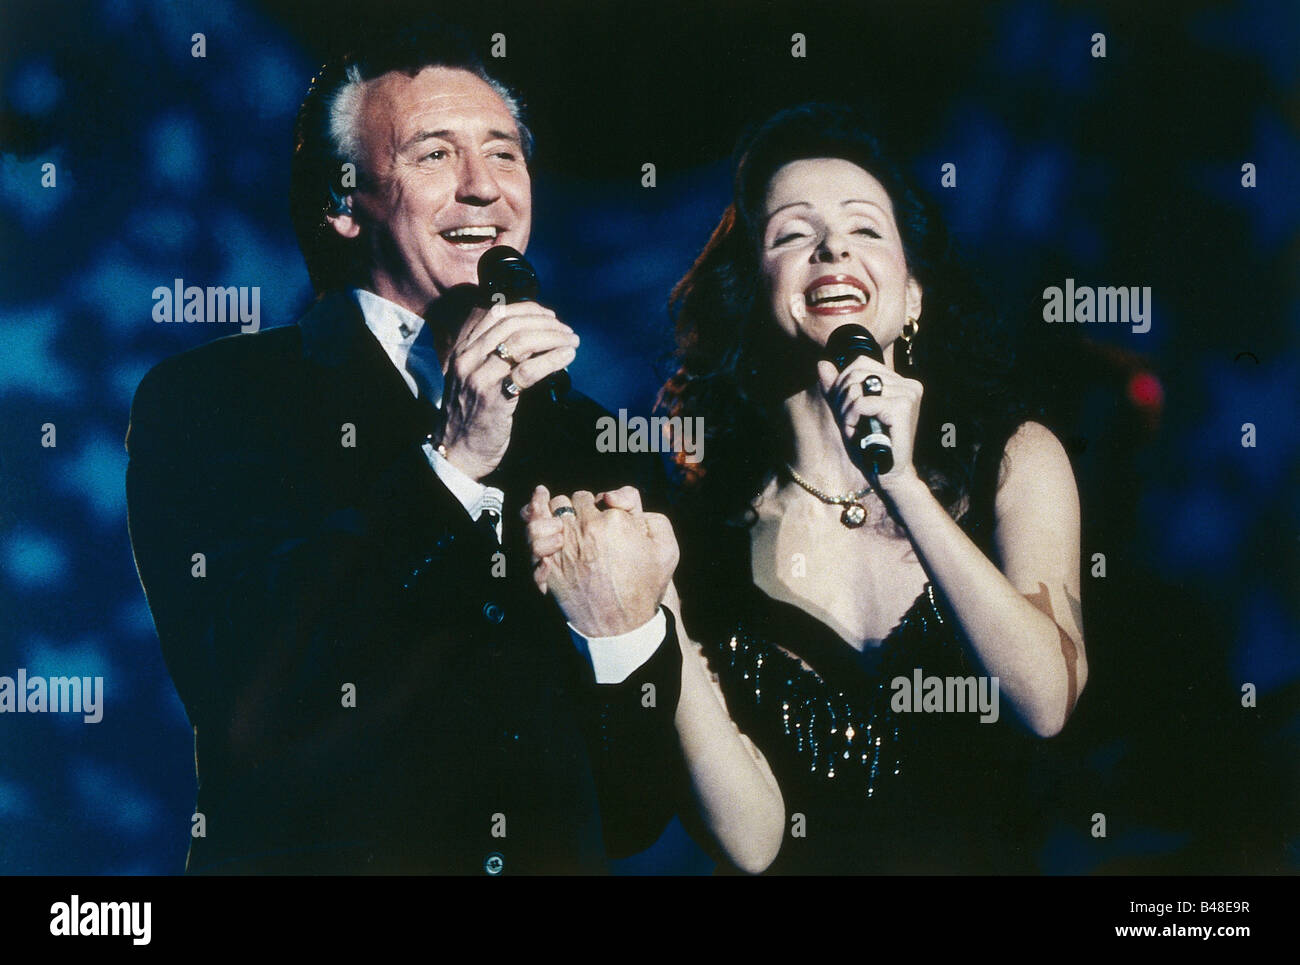 Christie, Tony, * 25.4.1943, English musician and singer, with Vicky Leandros, concert, Munich, 3.2.1995, Stock Photo